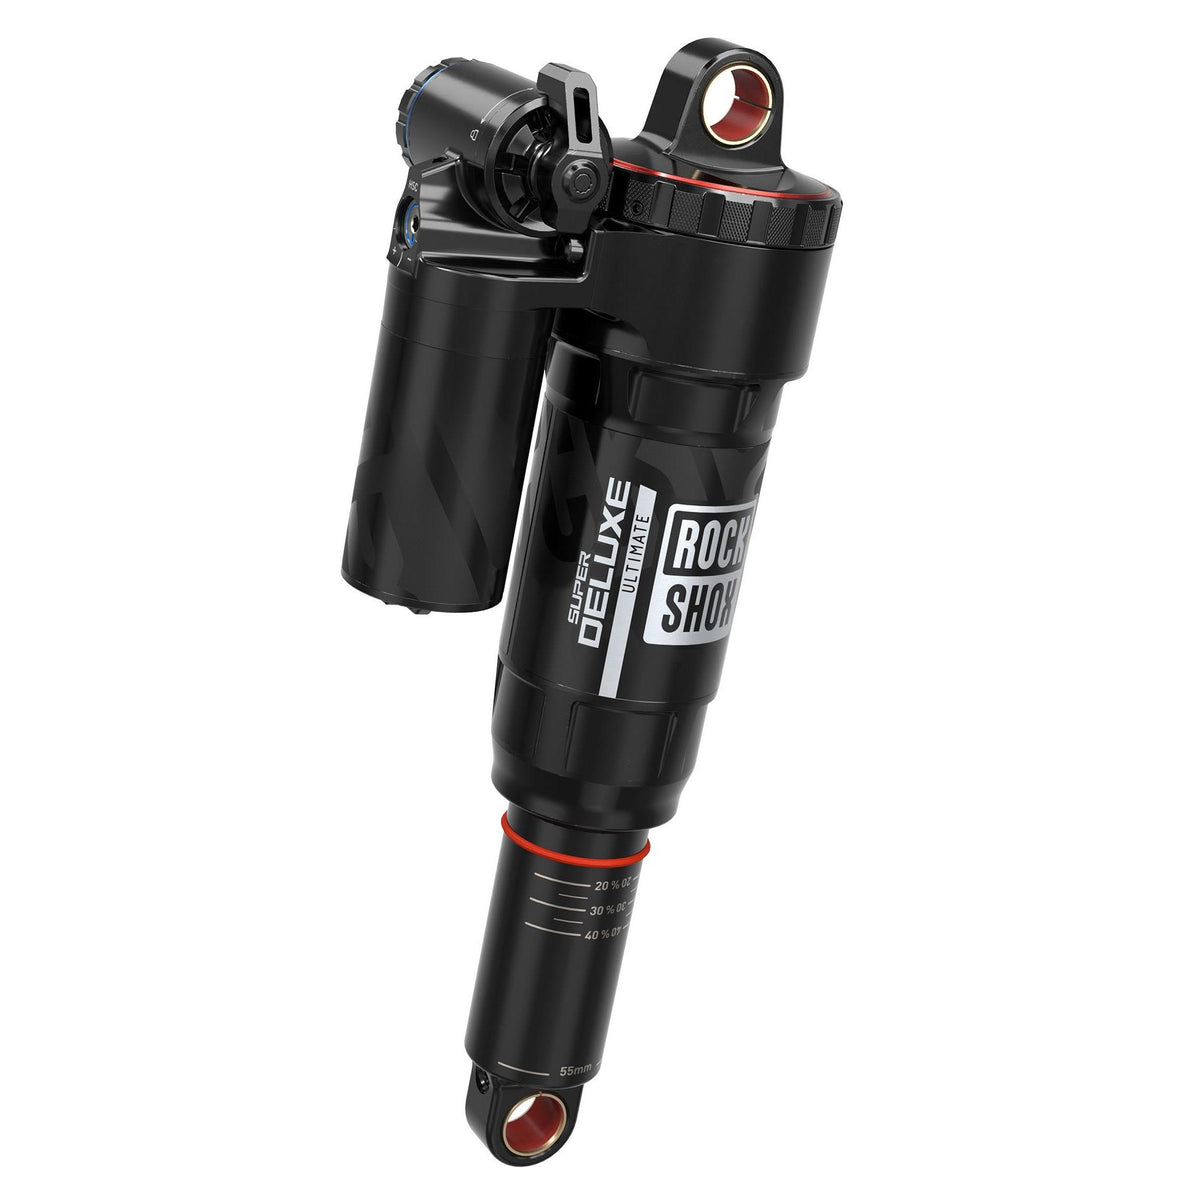 Rockshox Super Deluxe Ultimate Rear Shock RC2T - Linear Air, 0Neg/1Pos Tokens, Linearreb/Mcomp, 320LB Lockout, Hydraulic Bottom Out, Standard Standard(20X8) C1 Specializd Epic Evo 2021+ Black 190X40